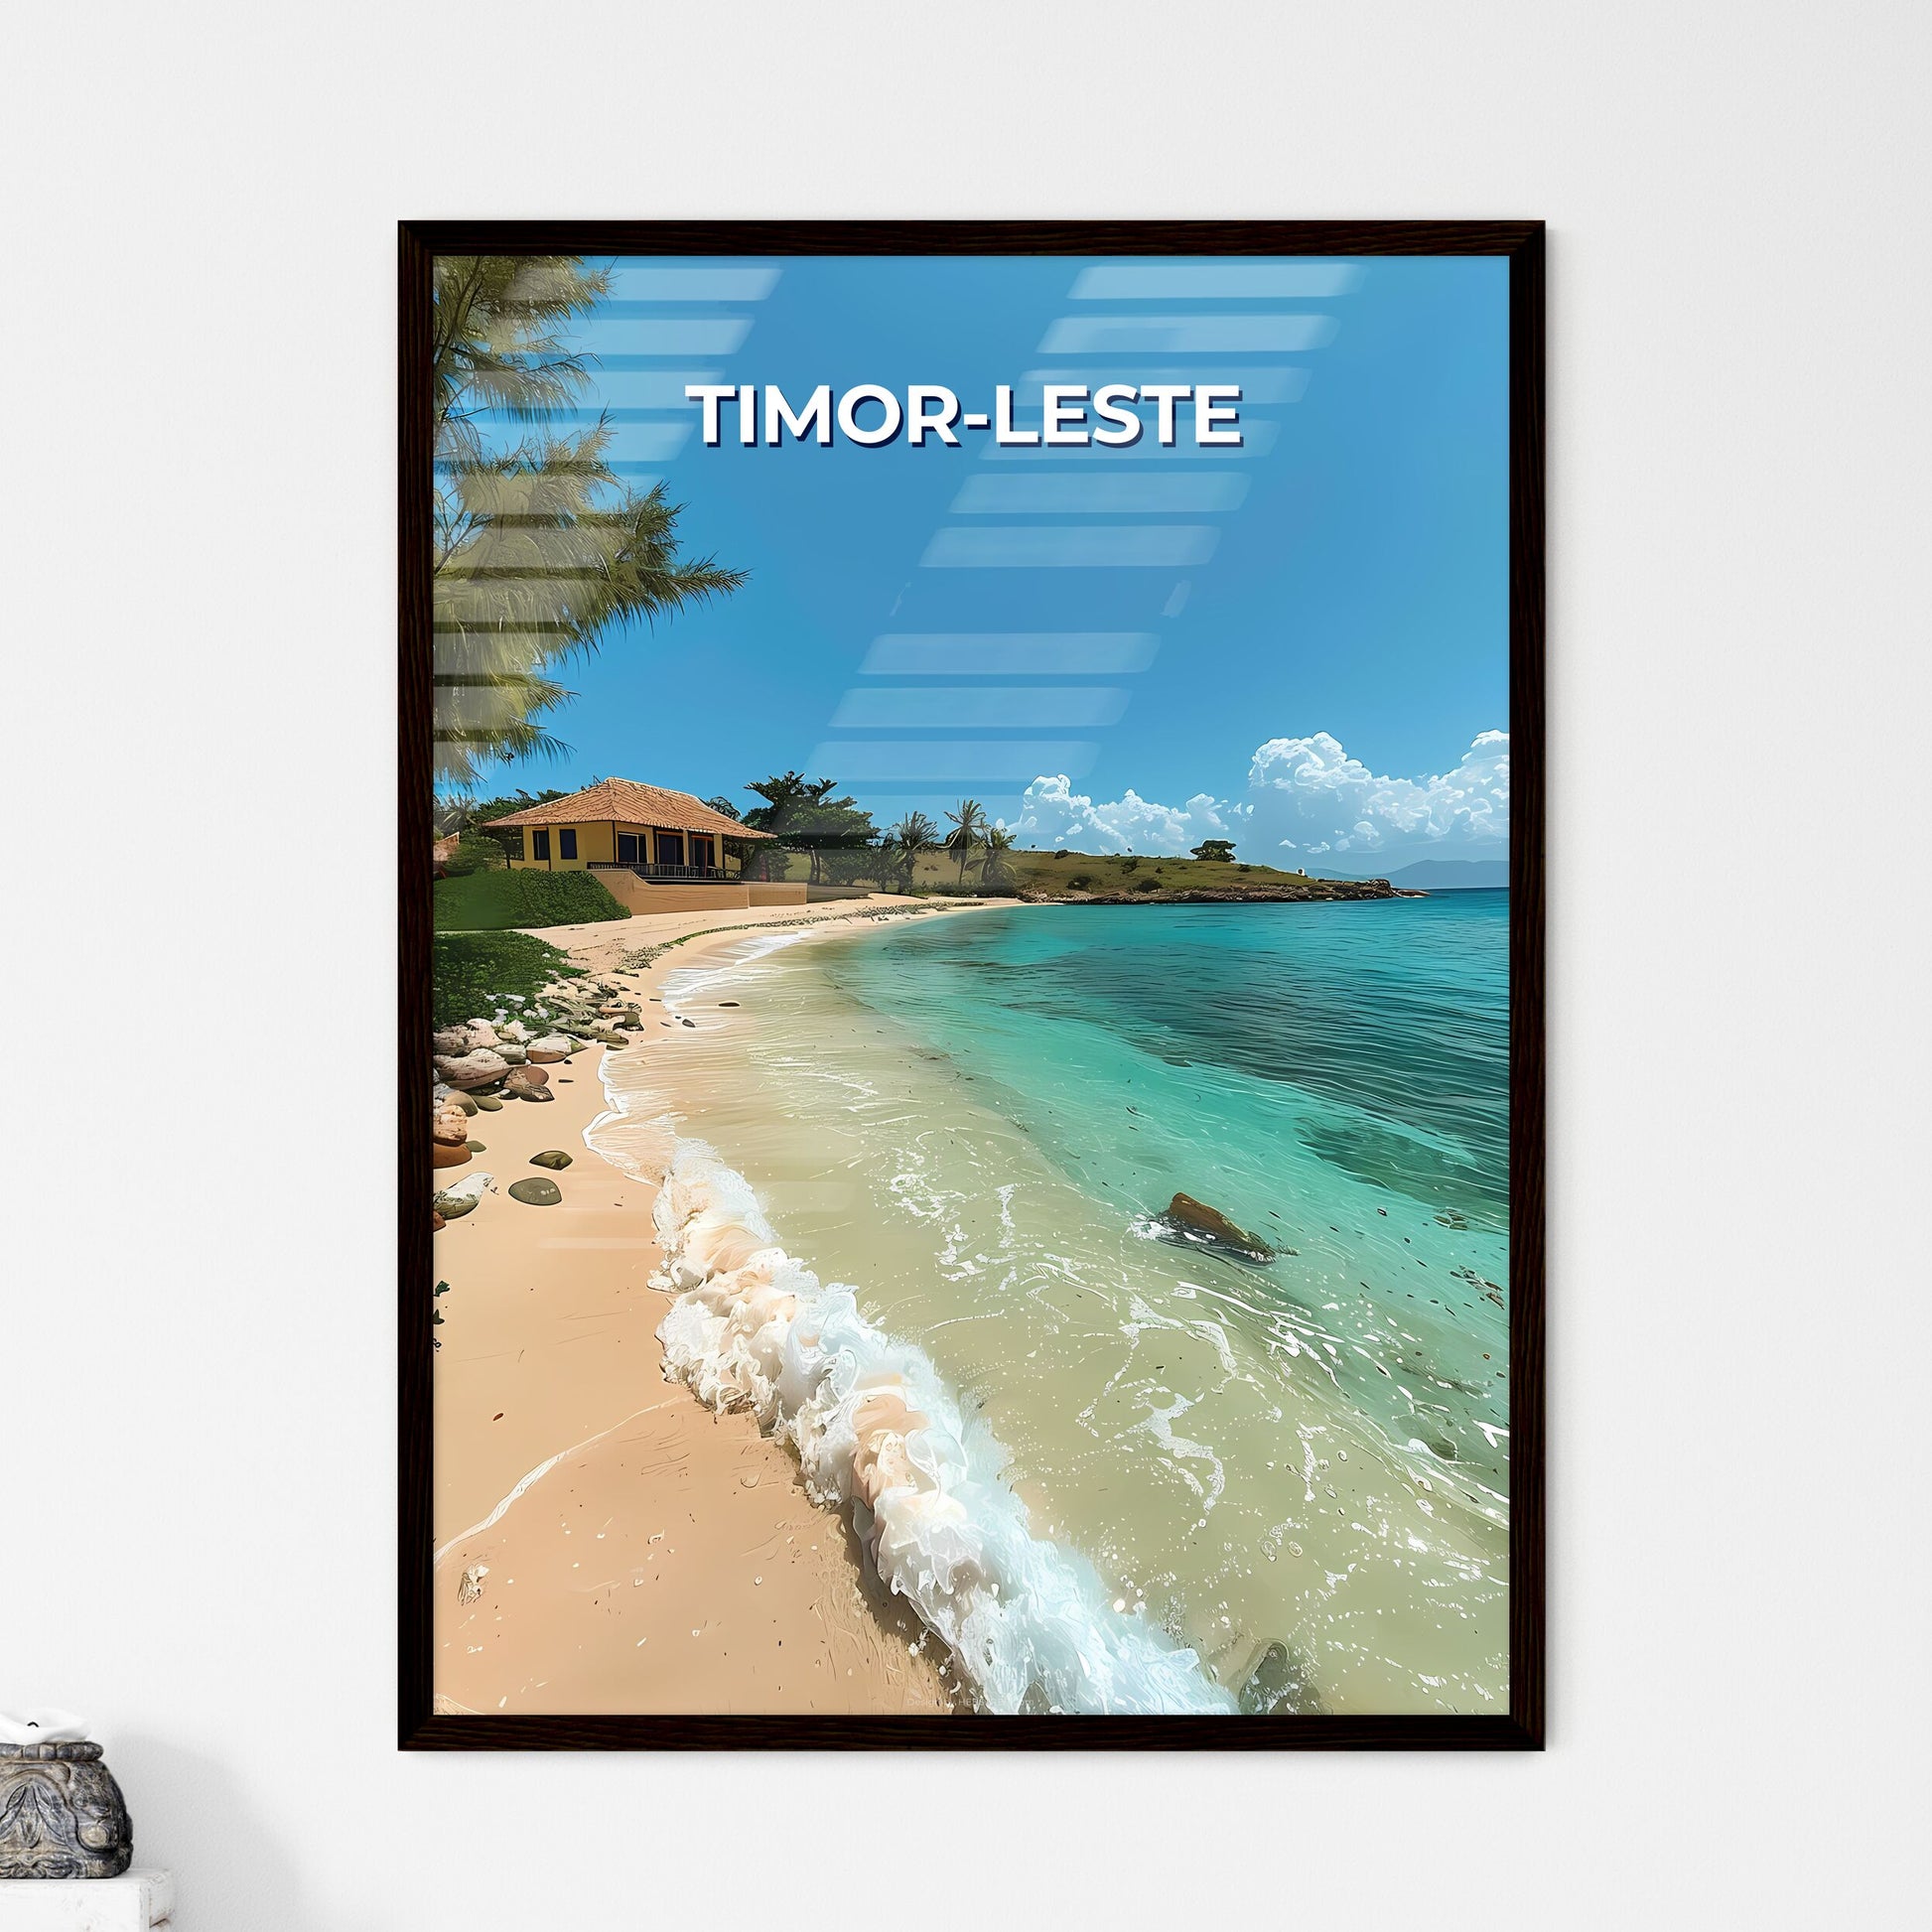 Artistic Impression of a Beach in Timor-Leste, Southeast Asia: House and Art by the Shore